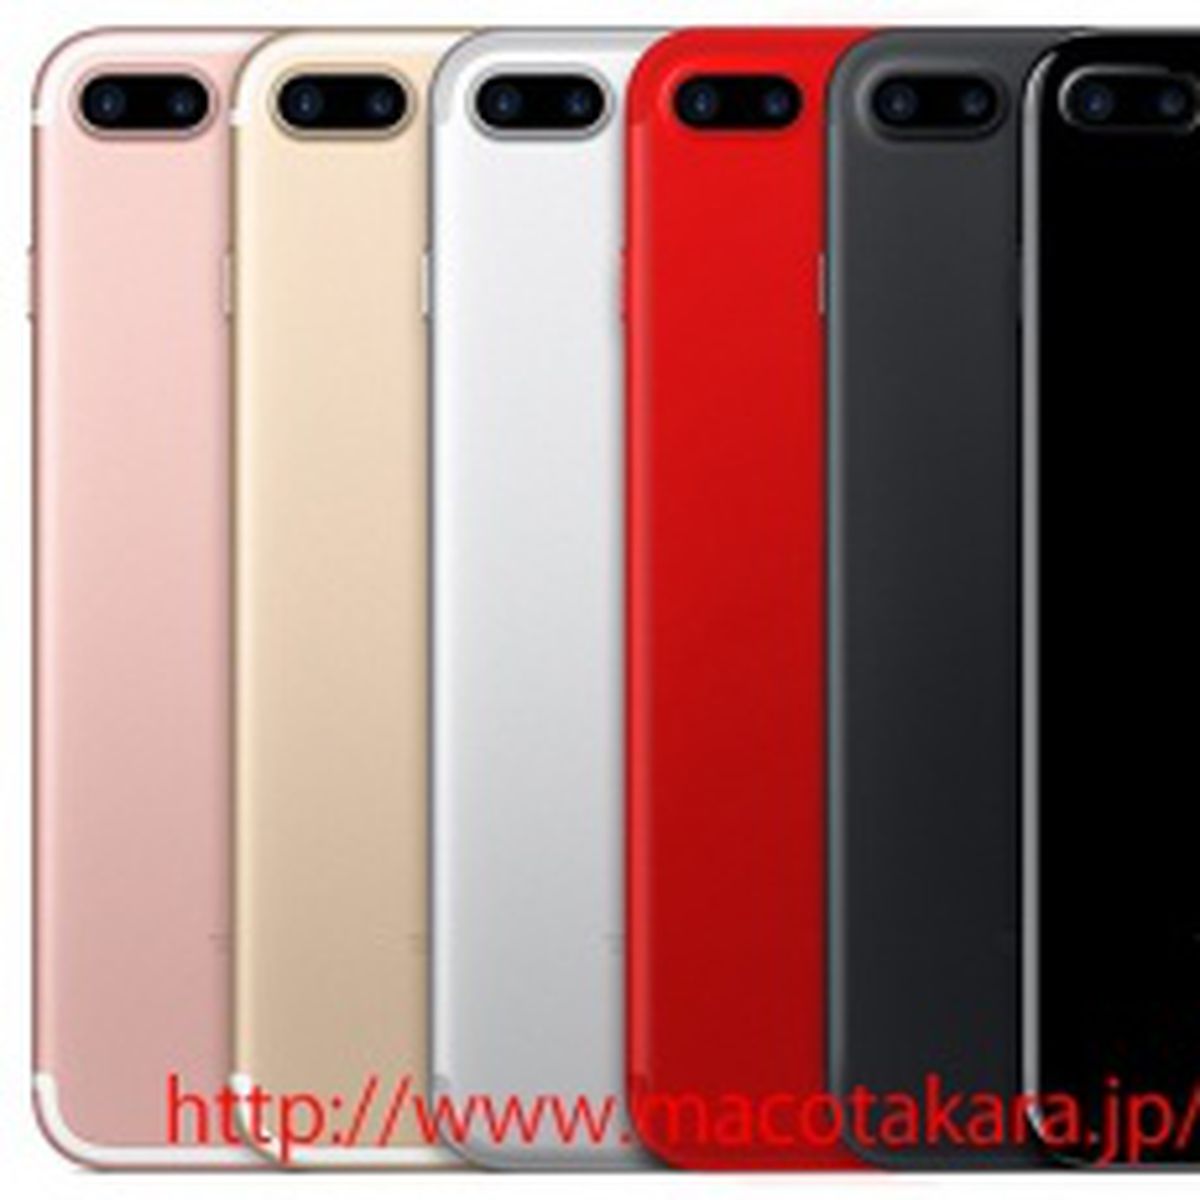 Iphone 7s And Iphone 7s Plus Said To Come In All New Red Color Lack New Design And Wireless Charging Macrumors